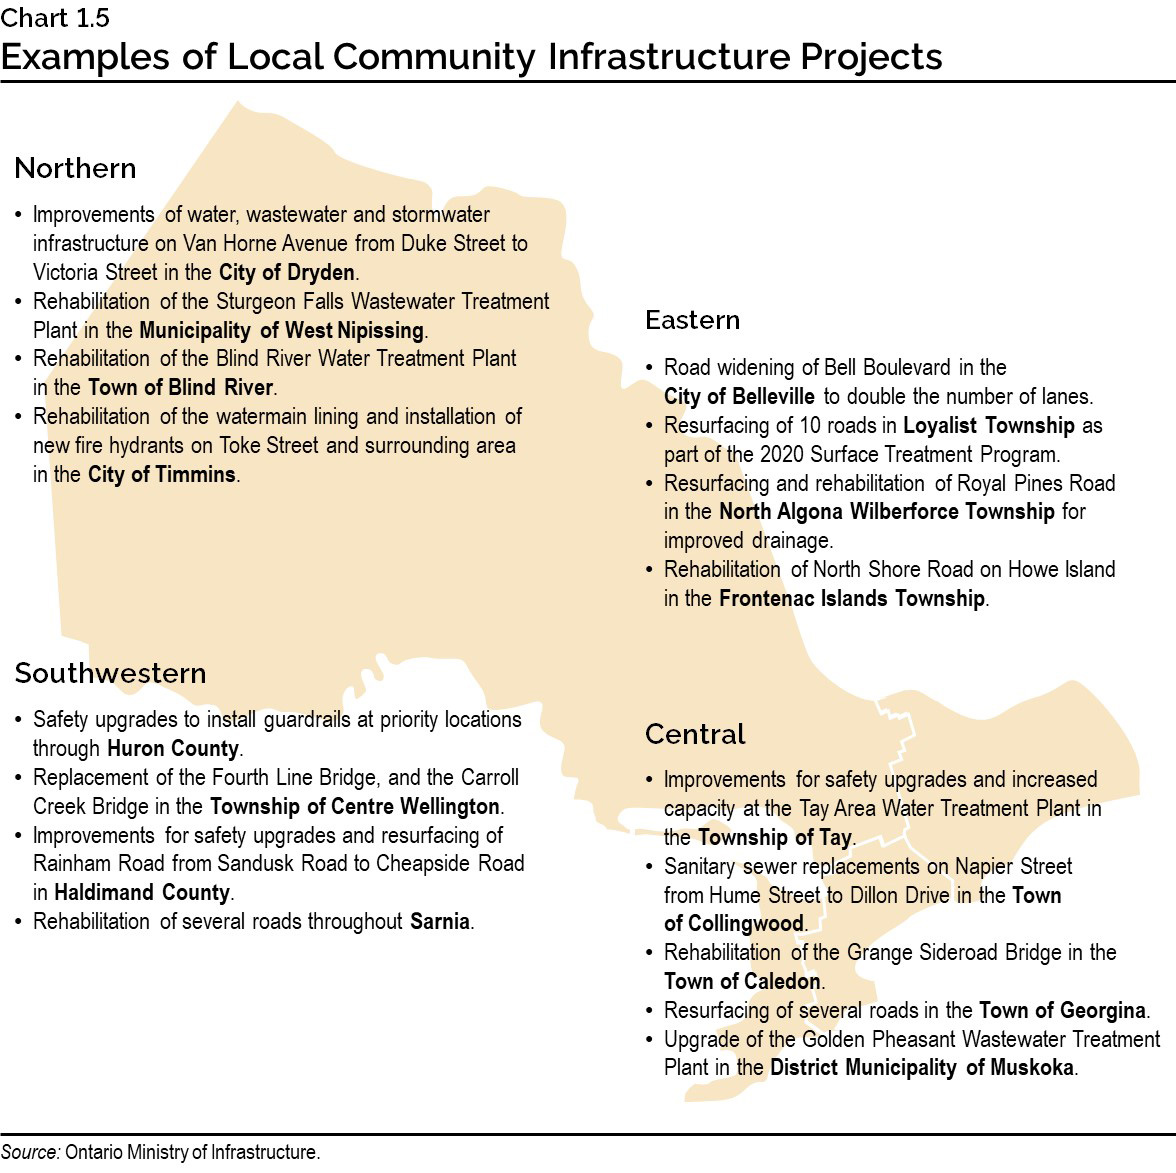 Chart 1.5: Examples of Local Community Infrastructure Projects